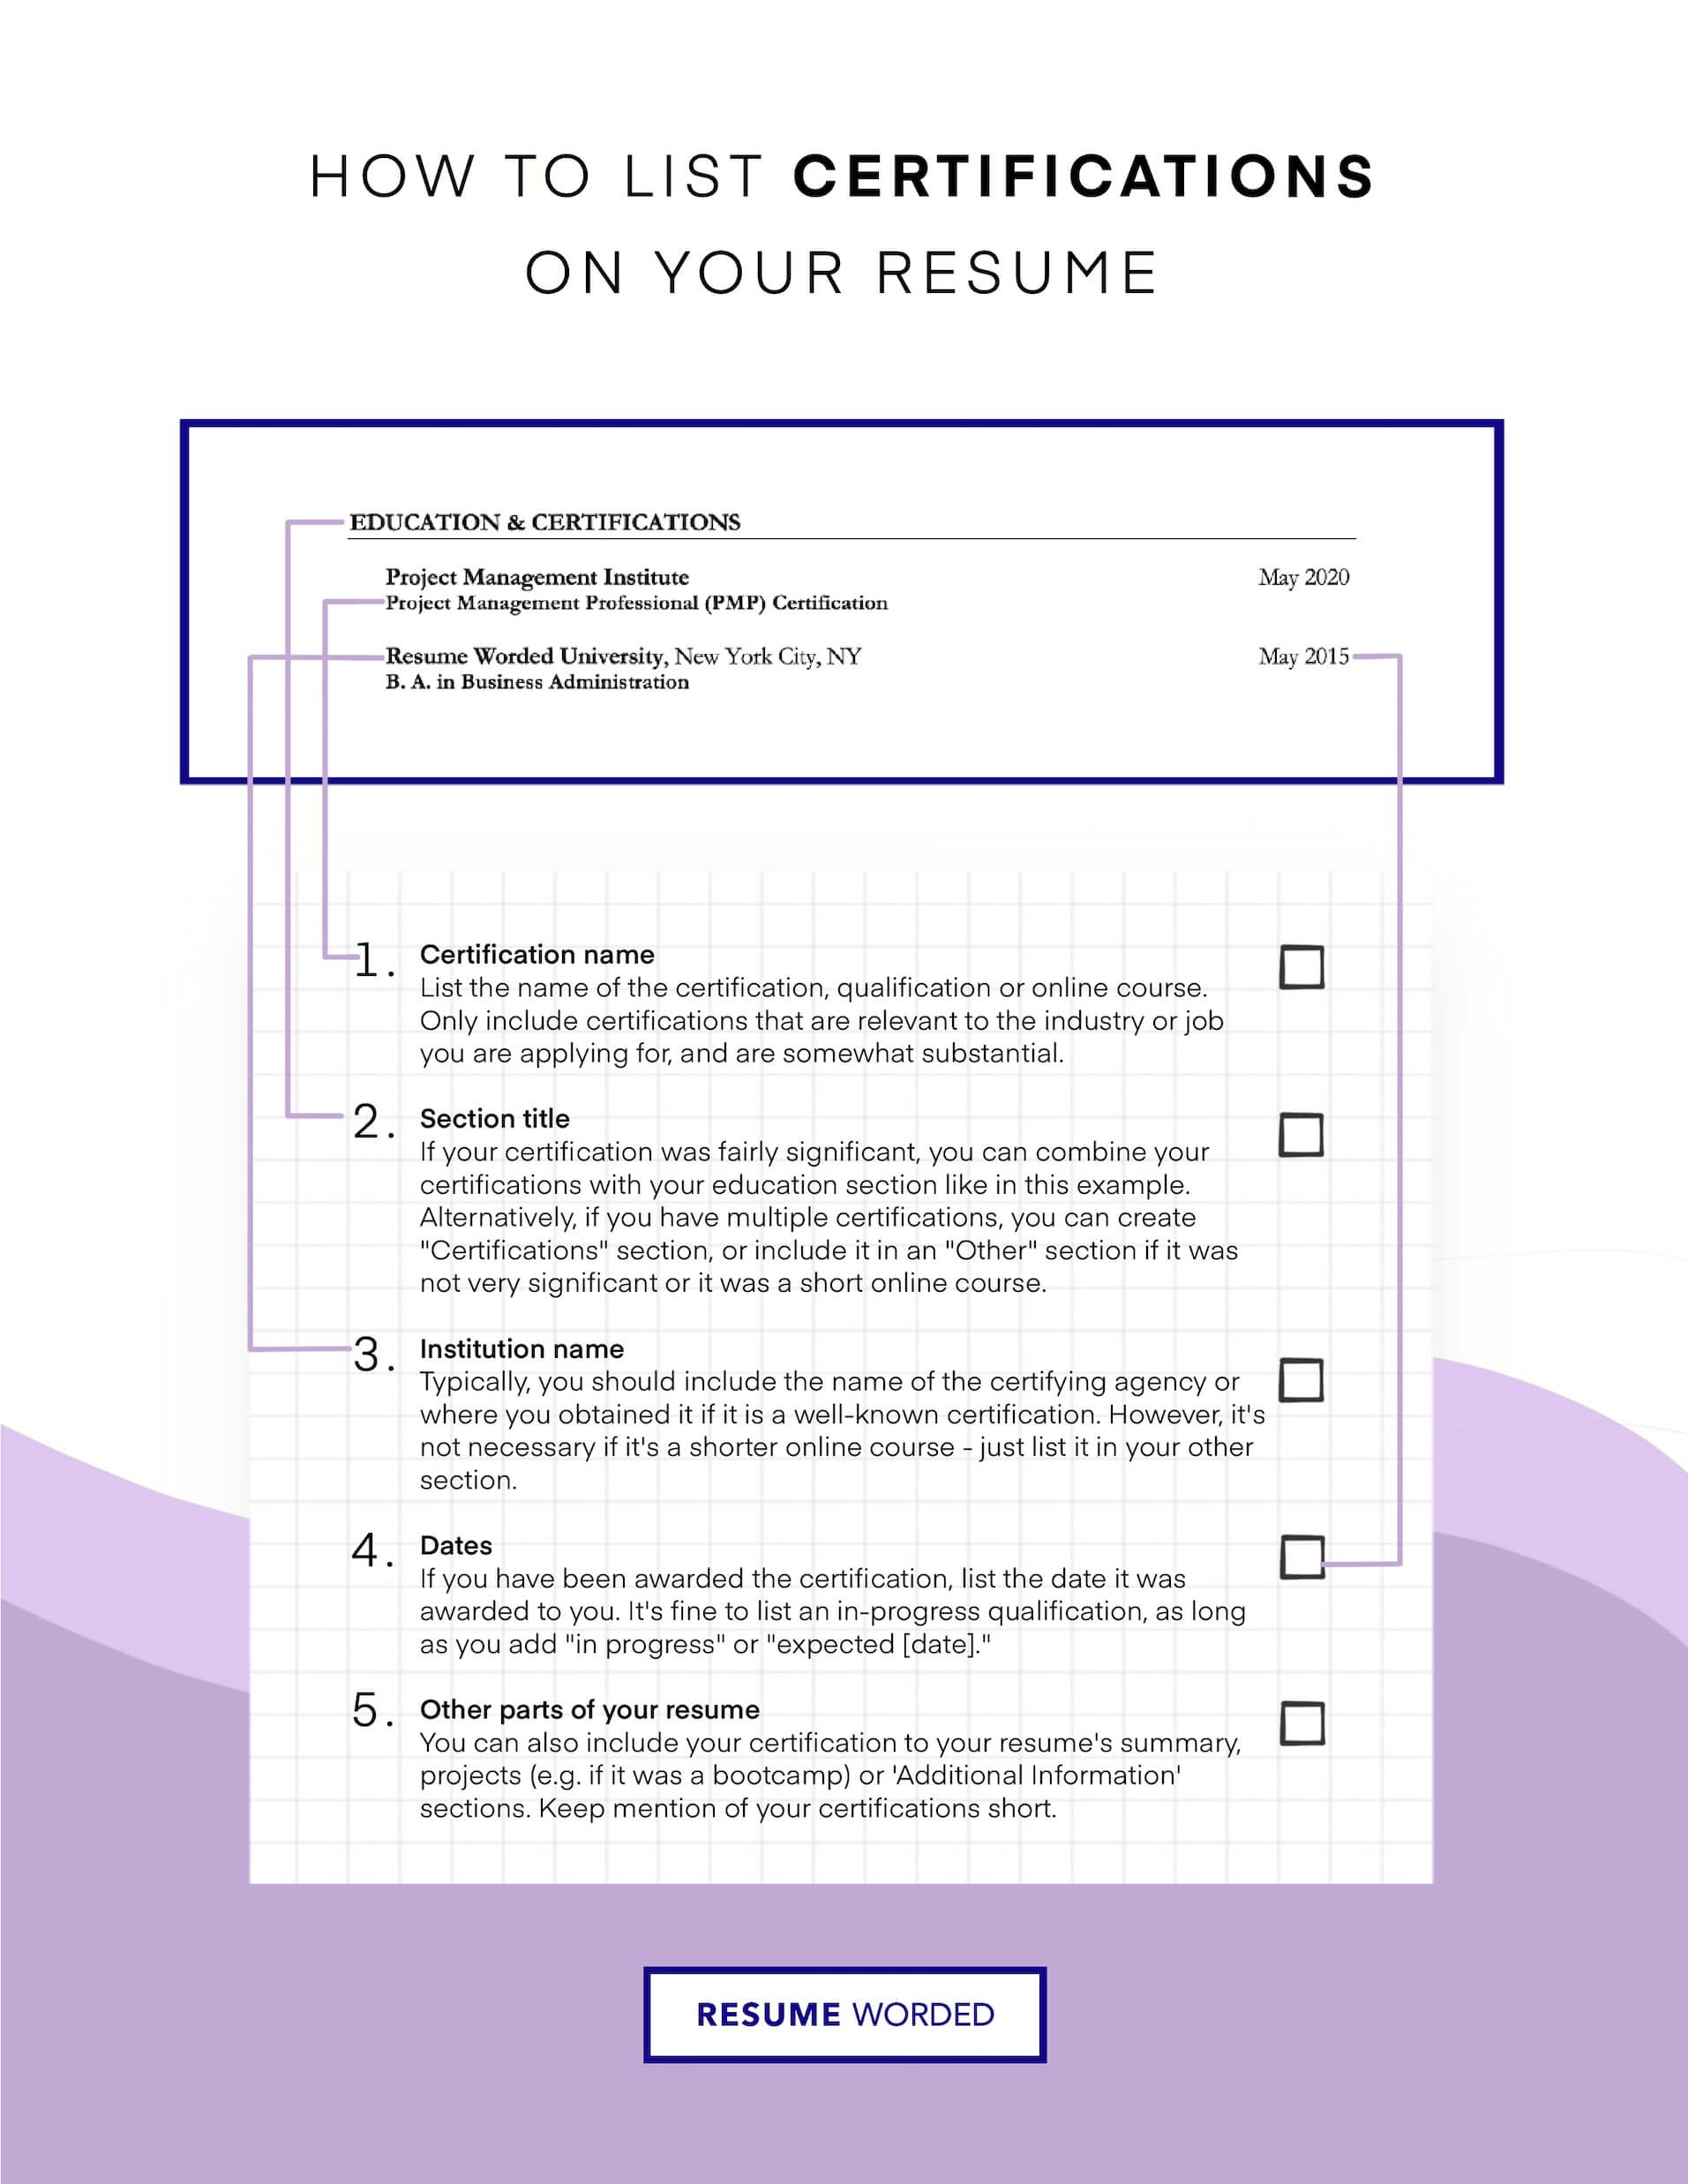 Elevate your resume with certifications. - Investment Banking Executive Assistant Resume